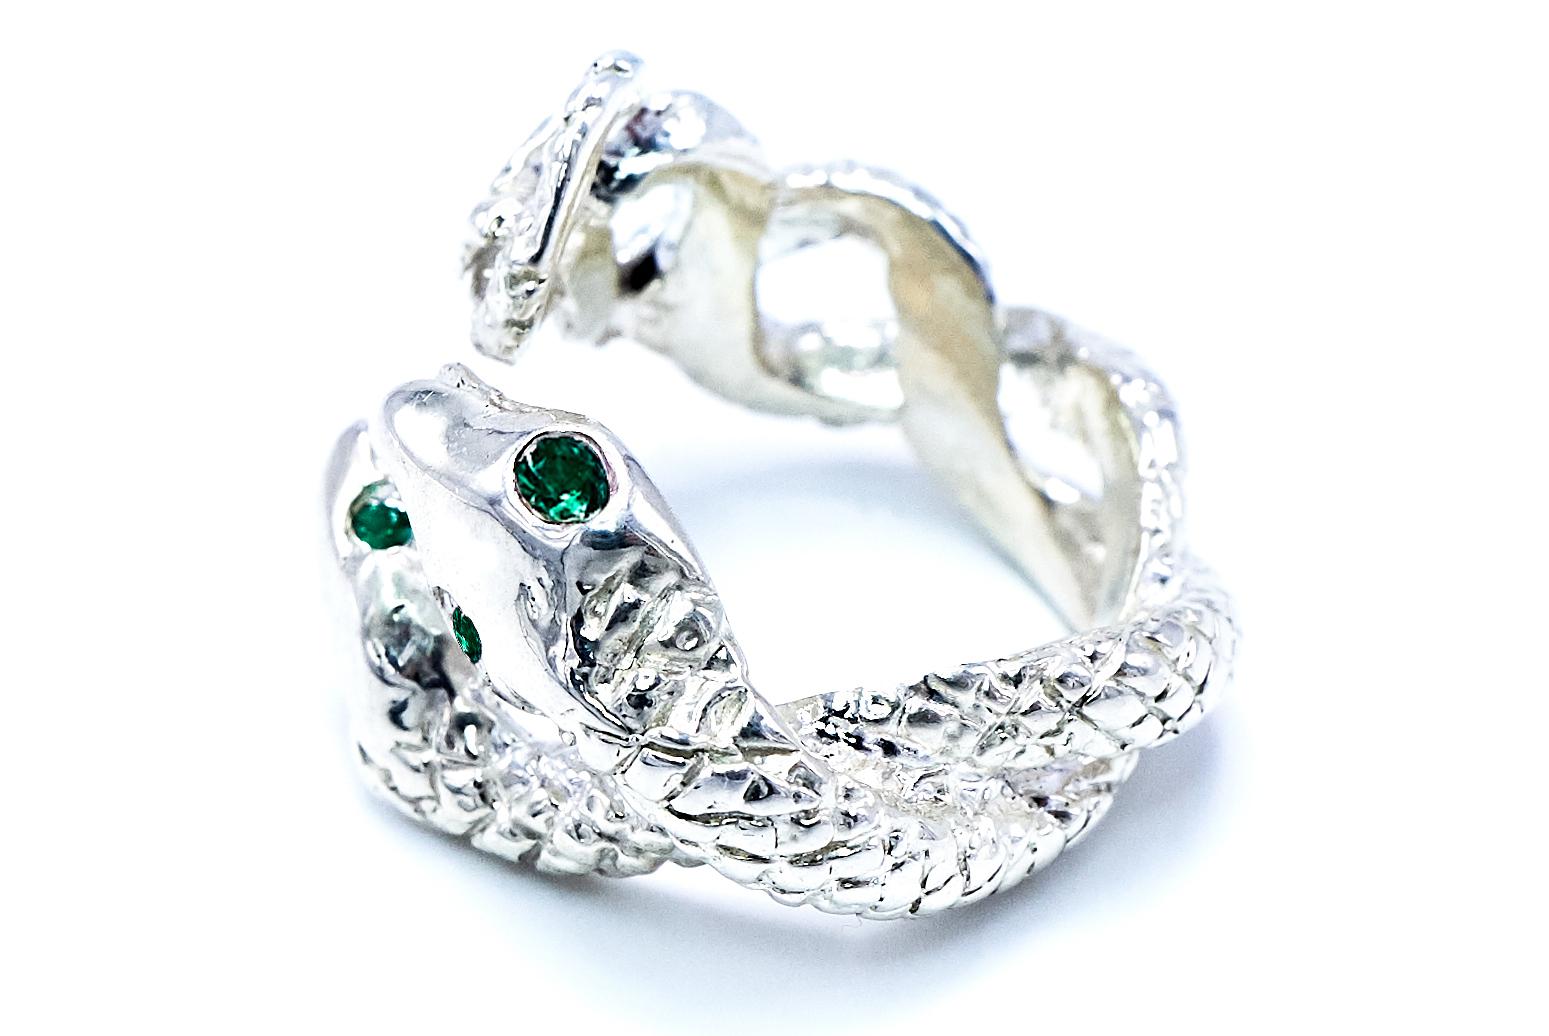 4 pcs Emerald Cocktail Ring Snake Sterling Silver J Dauphin

J DAUPHIN 